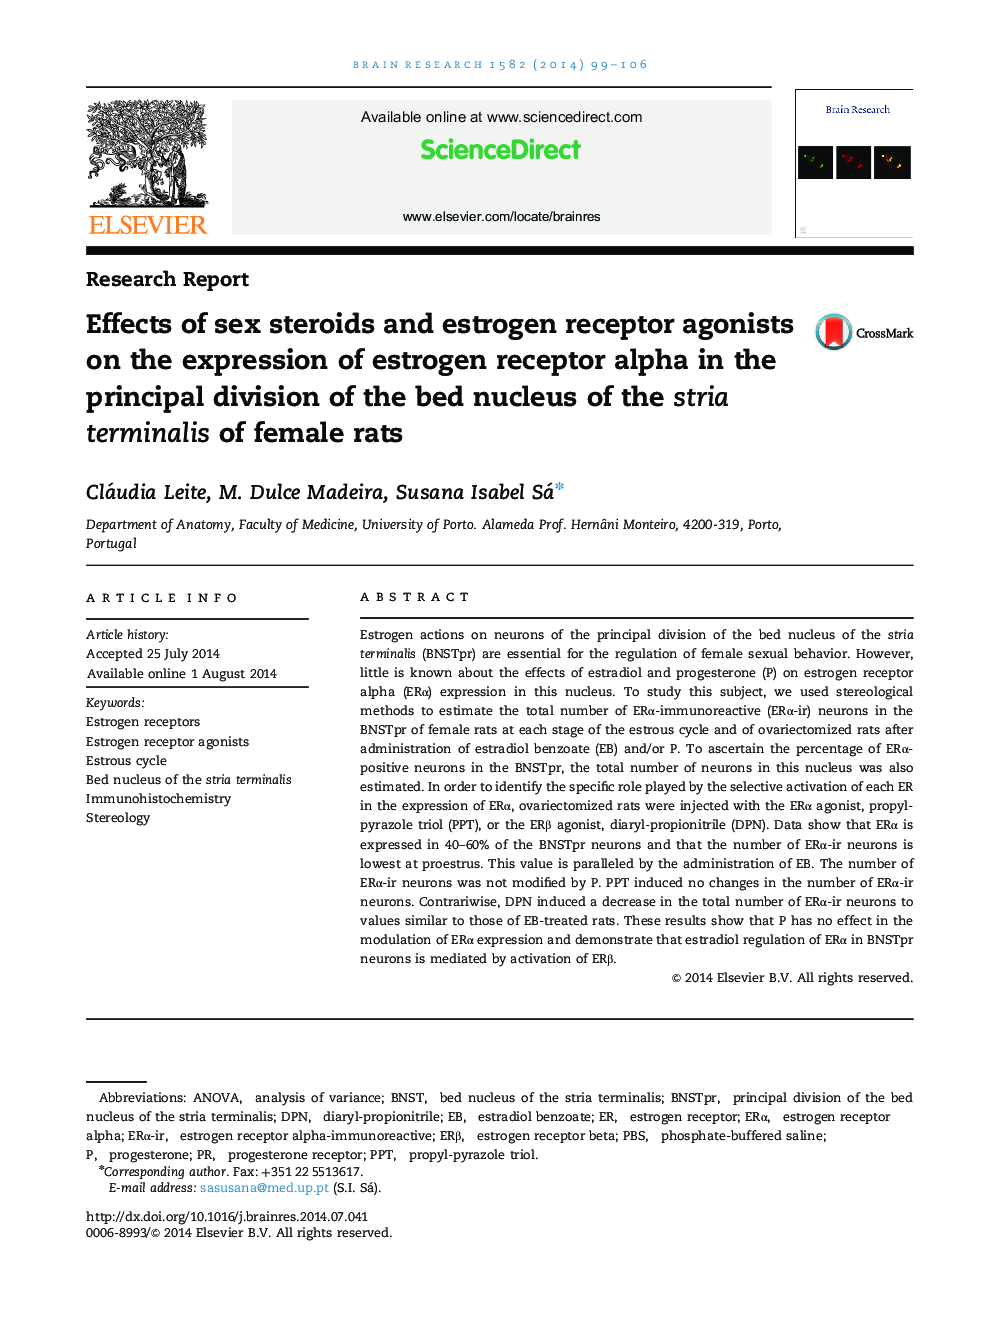 Effects of sex steroids and estrogen receptor agonists on the expression of estrogen receptor alpha in the principal division of the bed nucleus of the stria terminalis of female rats